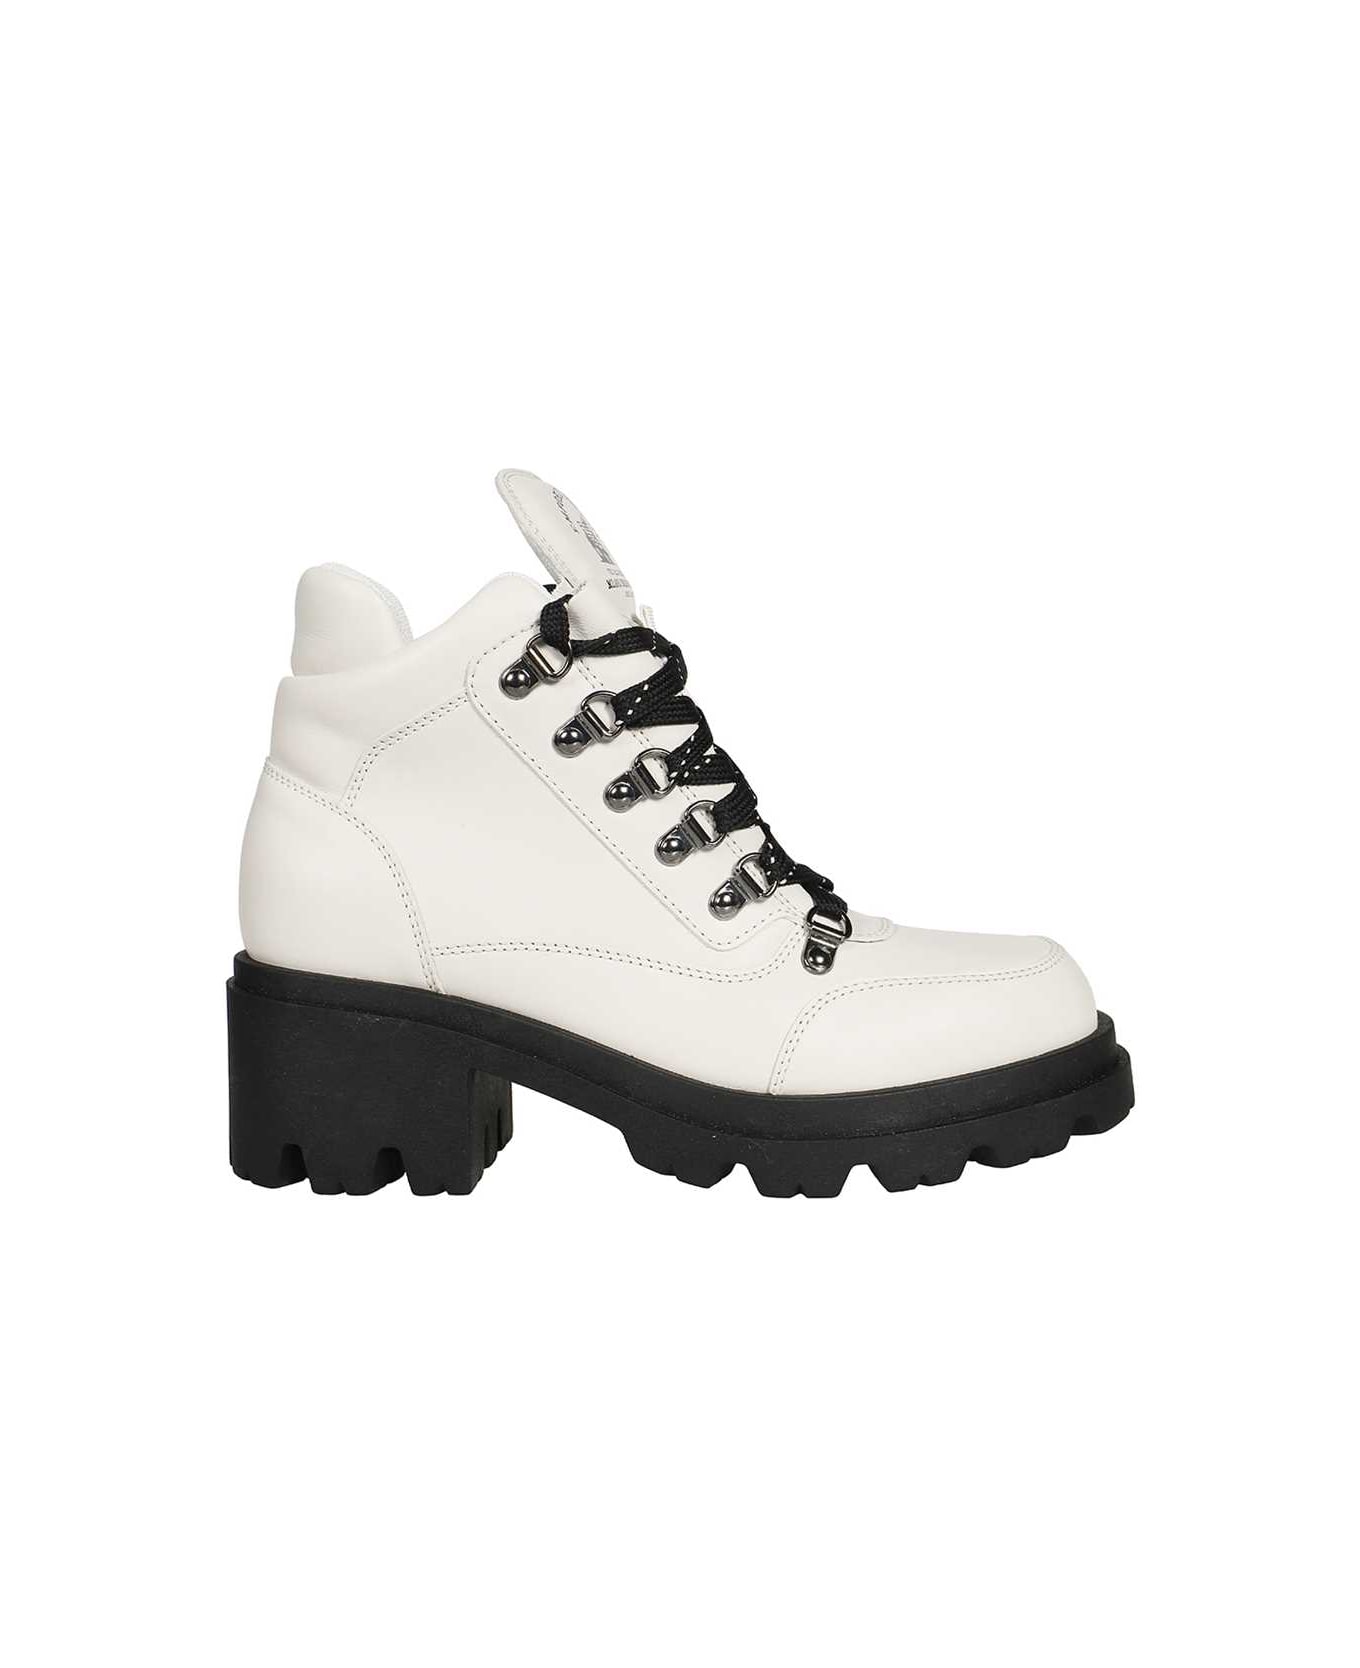 Emporio Armani Leather Lace-up Boots - Ivory